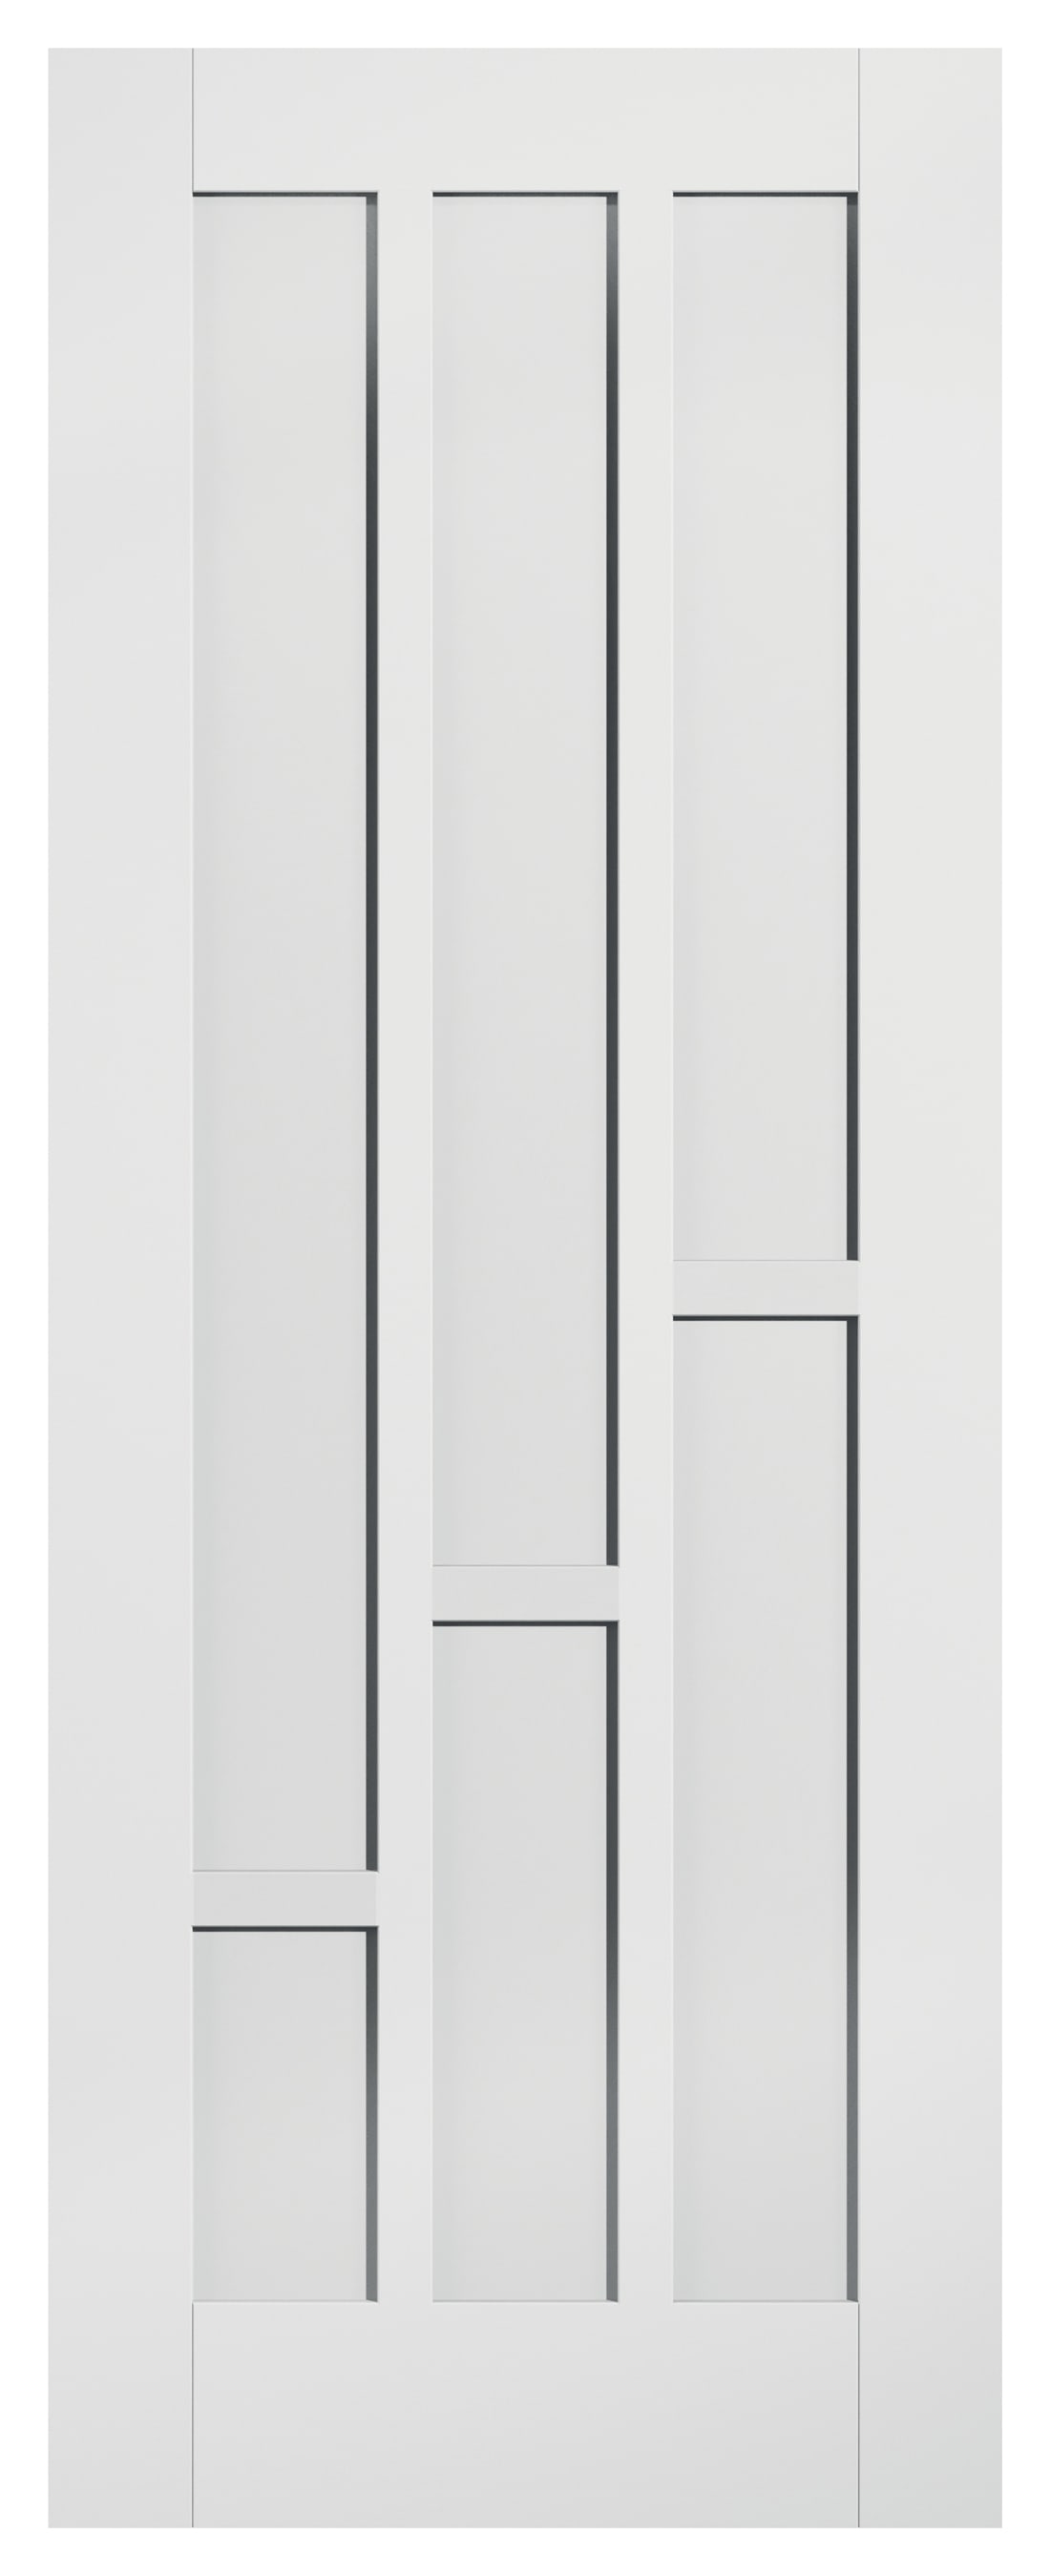 LPD Internal Coventry Primed White Door - 1981mm